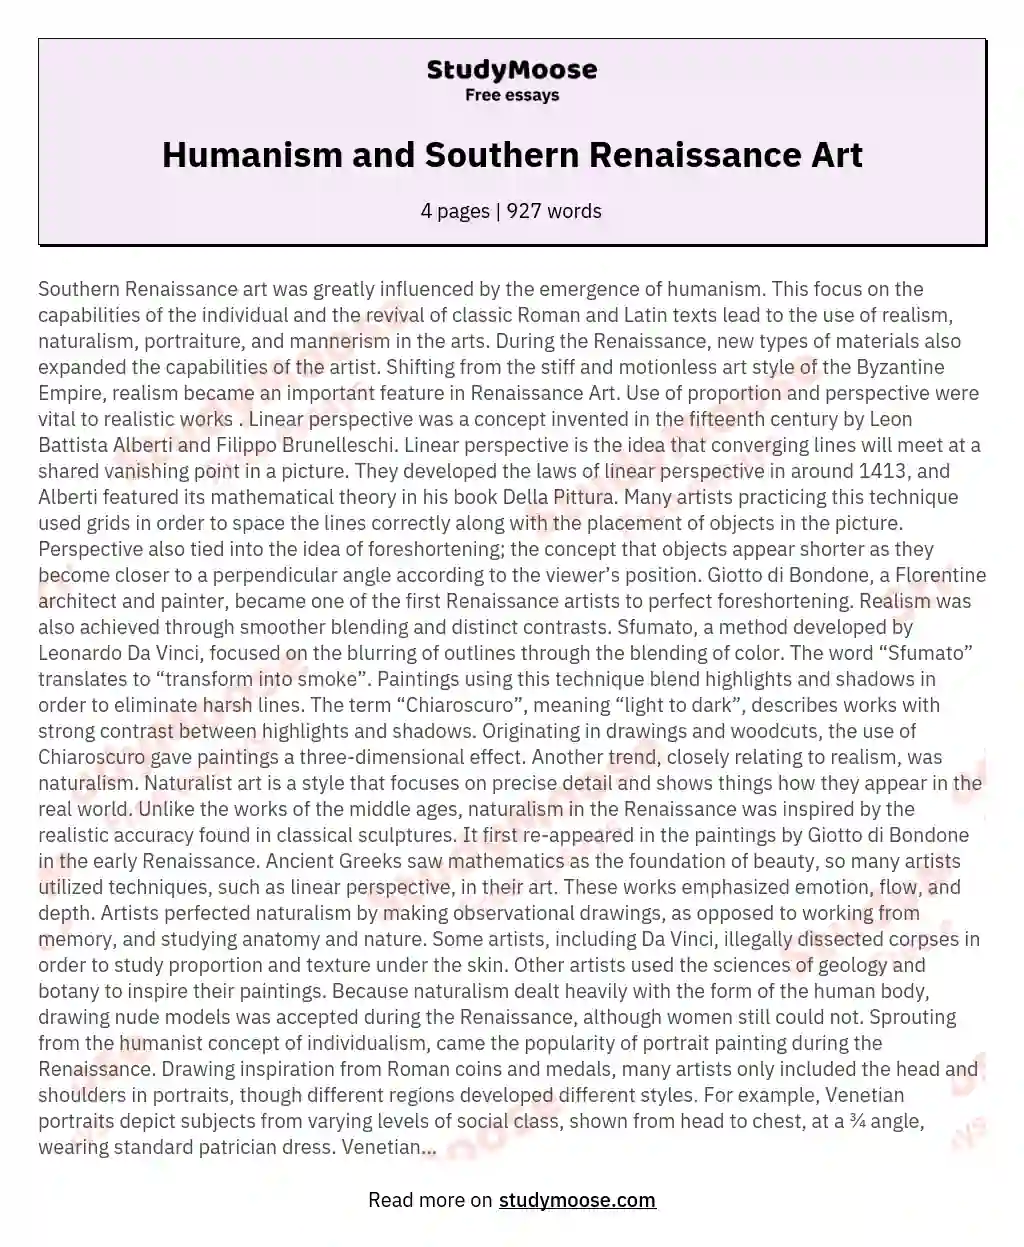 Humanism and Southern Renaissance Art essay